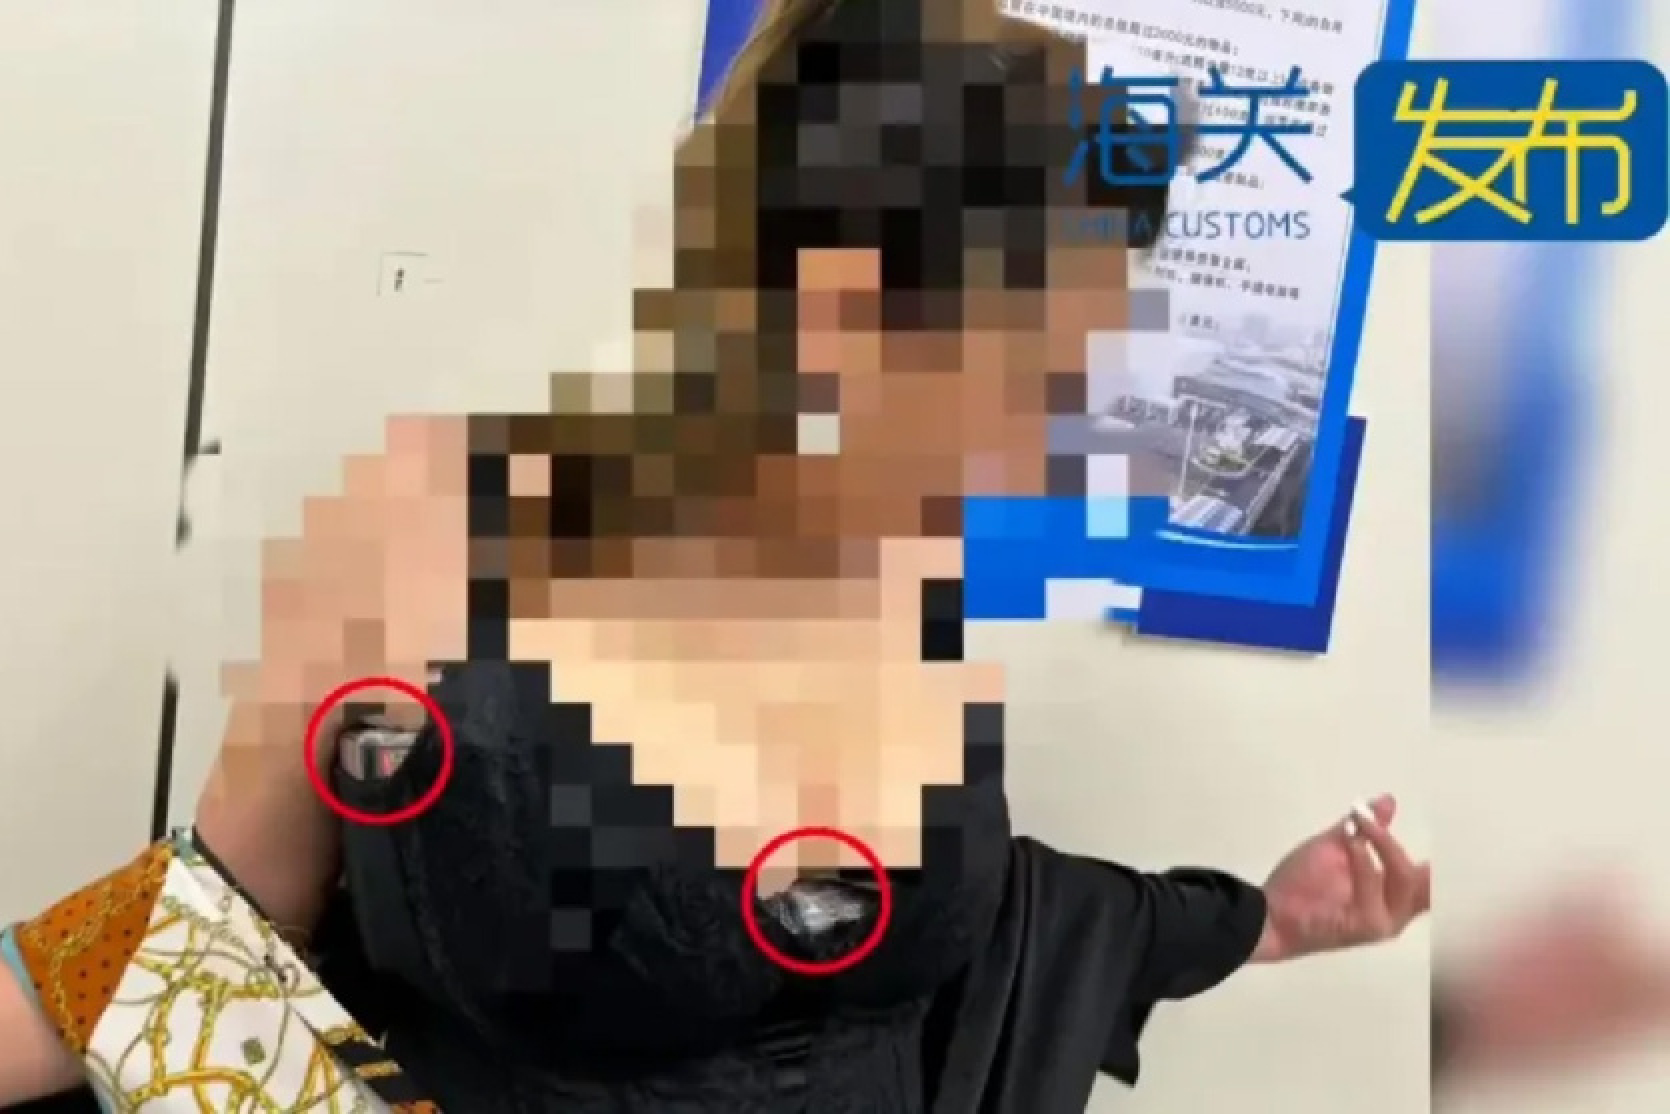 350 Nintendo Switch cartridges in a bra - Chinese customs officials detained a woman because her bust was too big